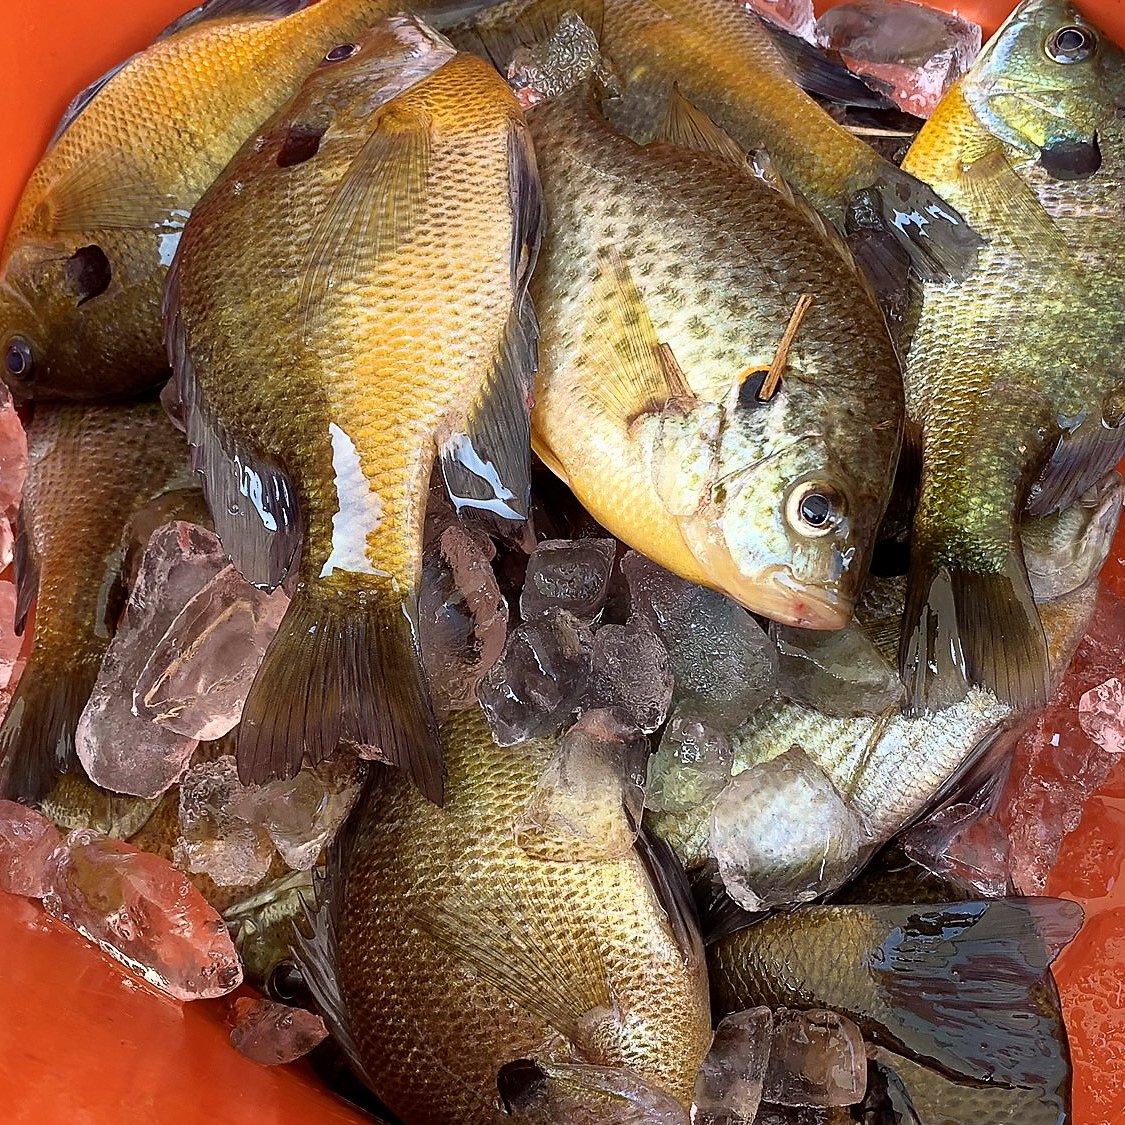 A cooler full of bluegills is the start to a great meal.